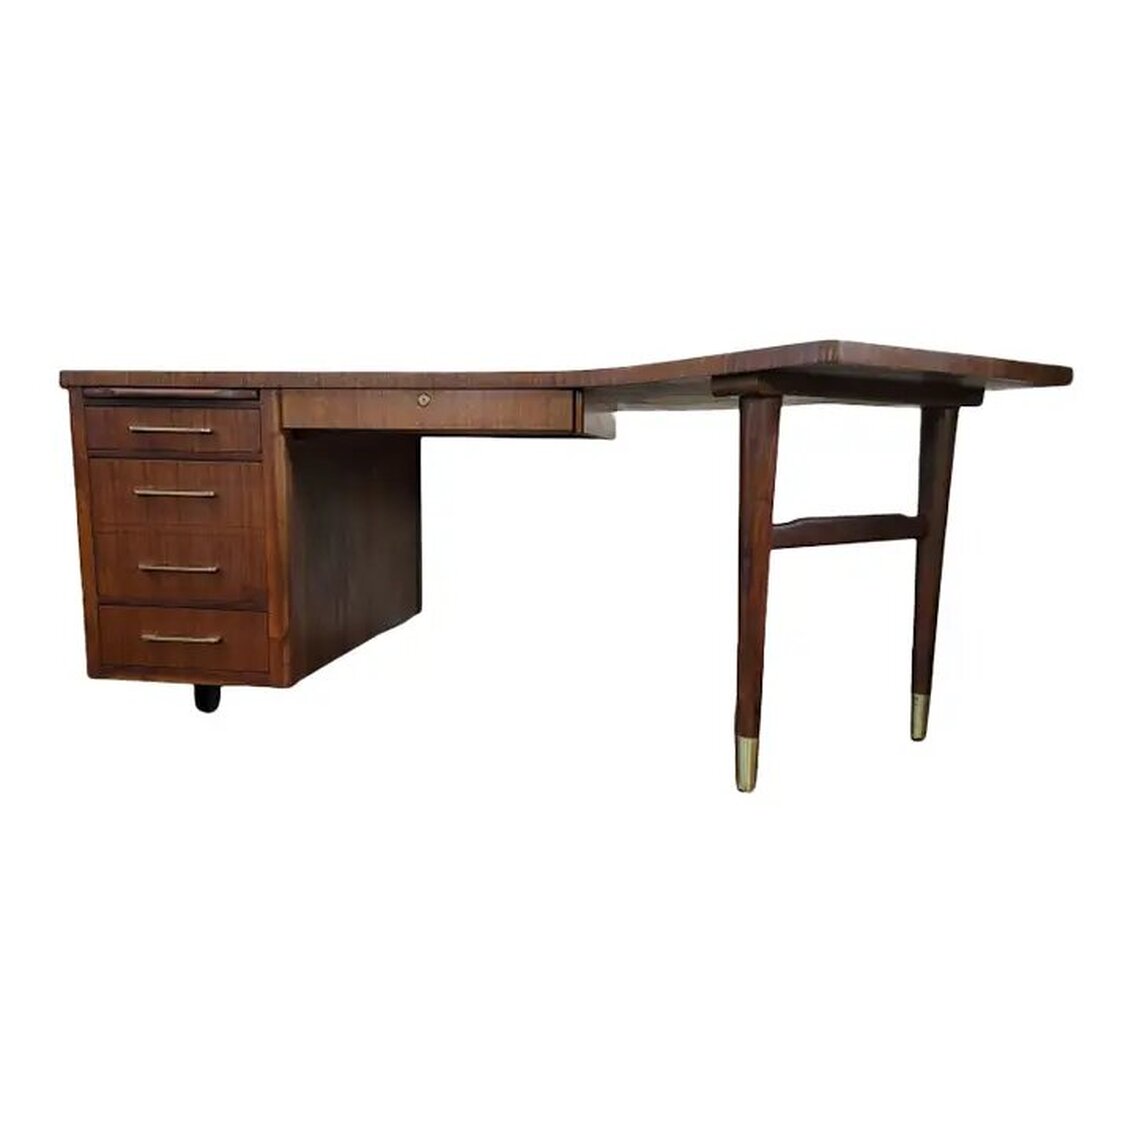 Vintage Boomerang Executive Desk was manufactured by the Alma Desk Company of High Point, North Carolina.  The desk is made of walnut wood with brass Art Moderne drawer pulls.  The burl walnut boomerang shaped top is trimmed with straight cut walnut veneer and rests upon two brass sabot footed walnut legs joined by a shaped stretcher at the right and a row of drawers at the left. The left side is supported by an ebonized stretcher foot.  The right-side legs may be adjusted to sit at an angle under the desk.  The left side features a pull-out shelf at top that was promoted by the company as able to hold up to 100 lbs., a shallow drawer, a file cabinet, and a bottom shallow drawer with side grooves for spacers.  At center is a single locking drawer. The lock is original to the piece and is numbered B614. When locked, all drawers in the desk are locked. The brass locking mechanism was made in the U.S.A. by the Chicago Lock Company. The desk comes with keys.  The case is constructed of straight cut walnut wood.